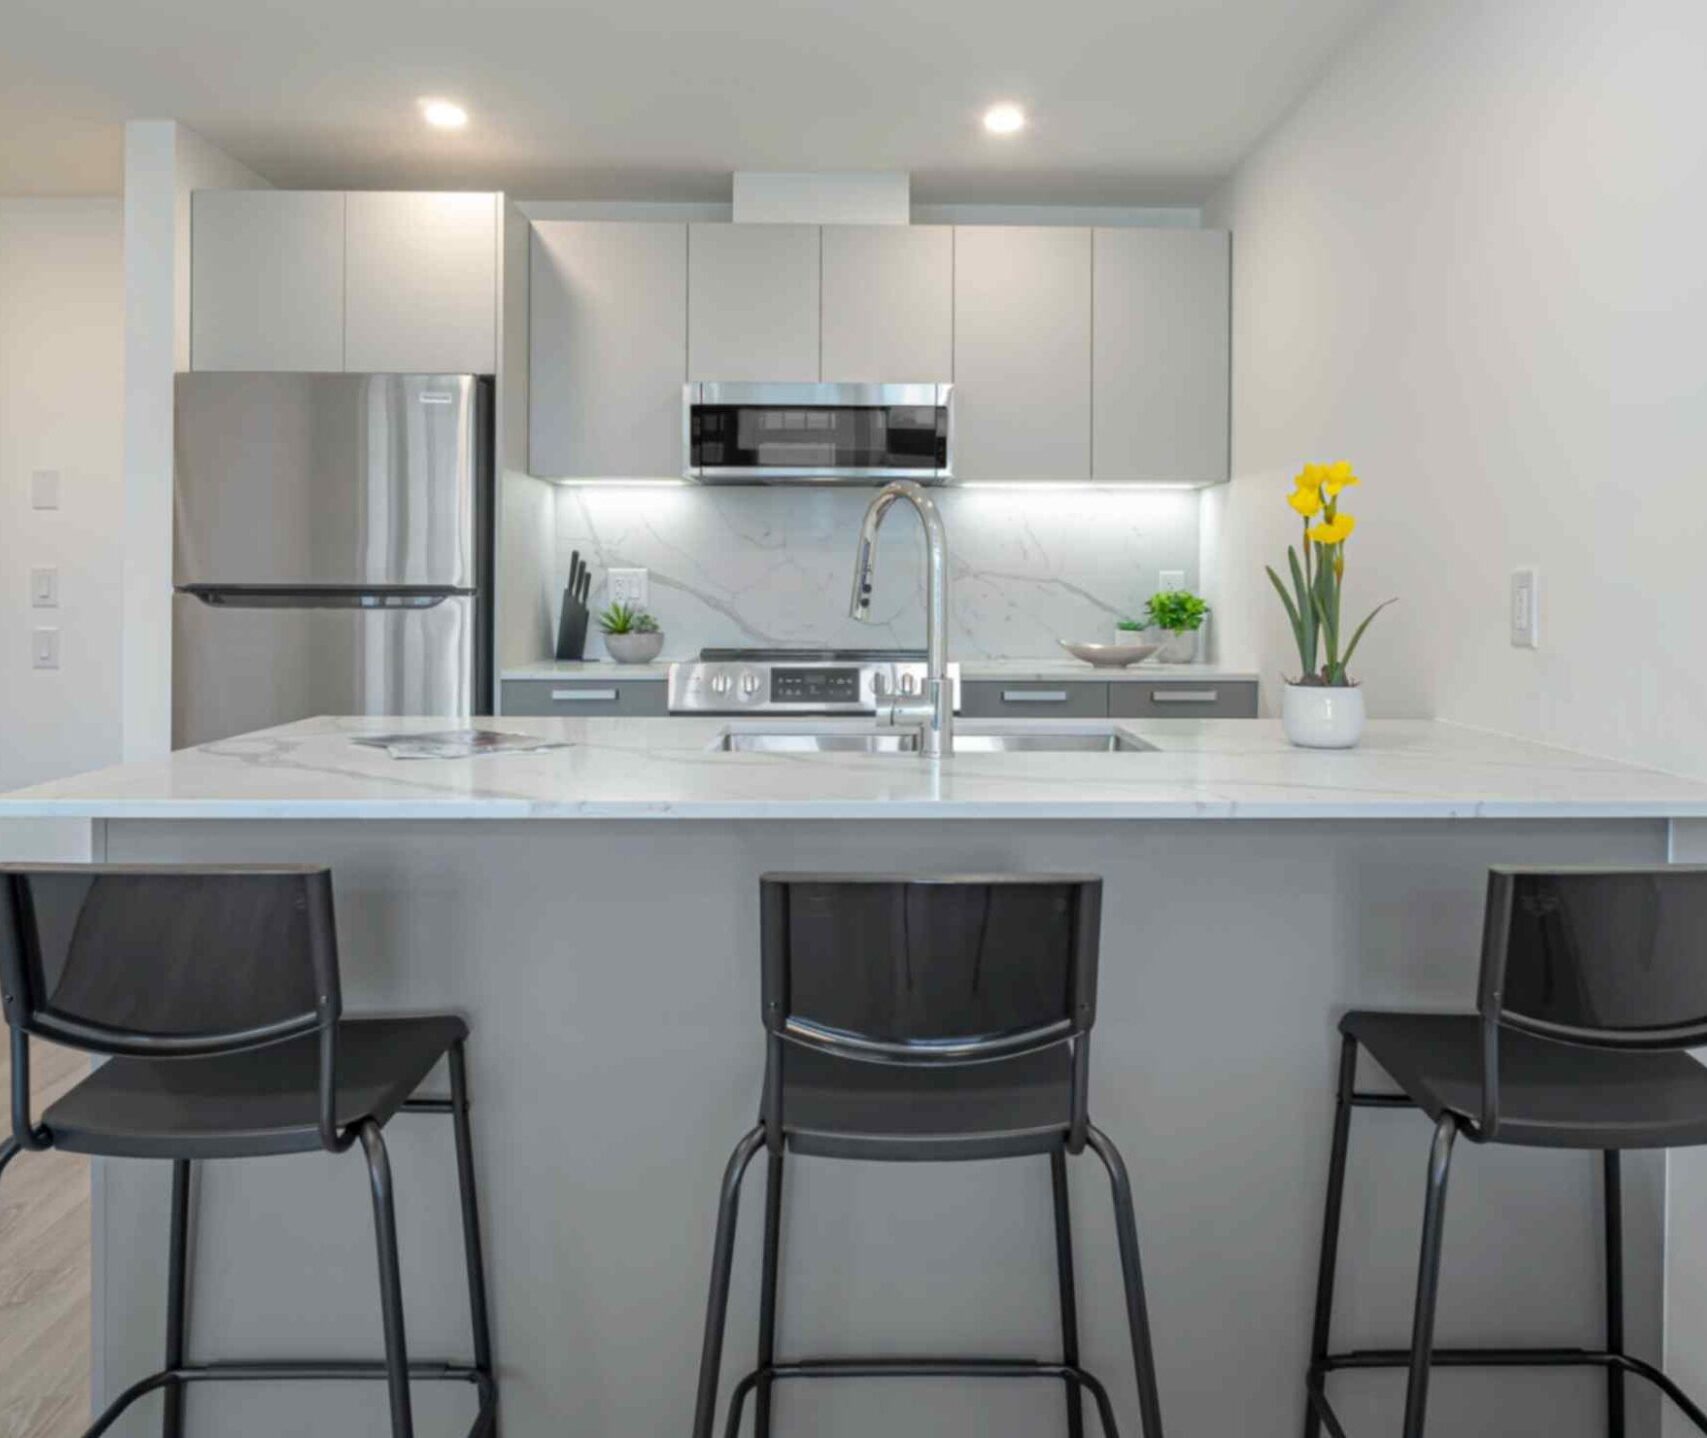 Kitchen cabinet installers vancouver